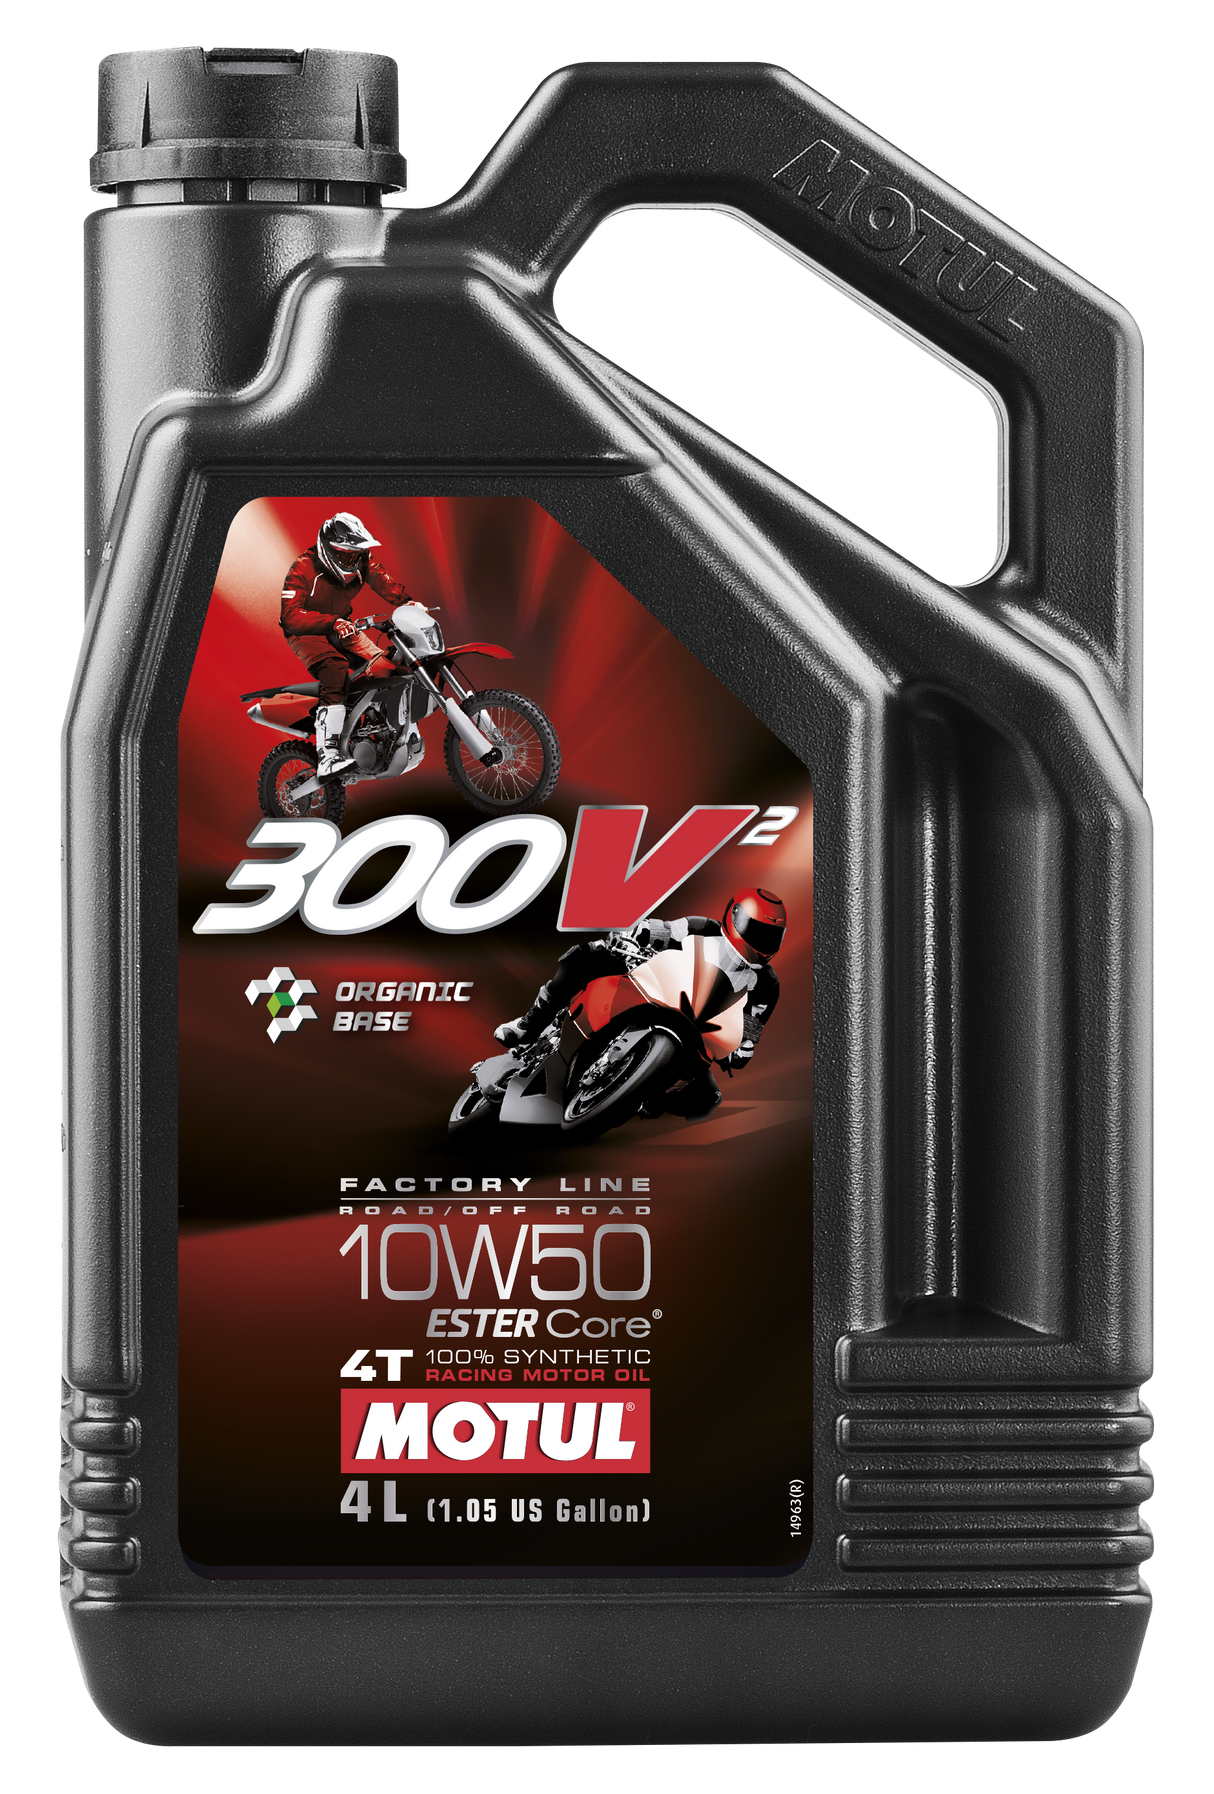 300V2 4T COMPETITION SYNTHETIC OIL 10W50 4 LT